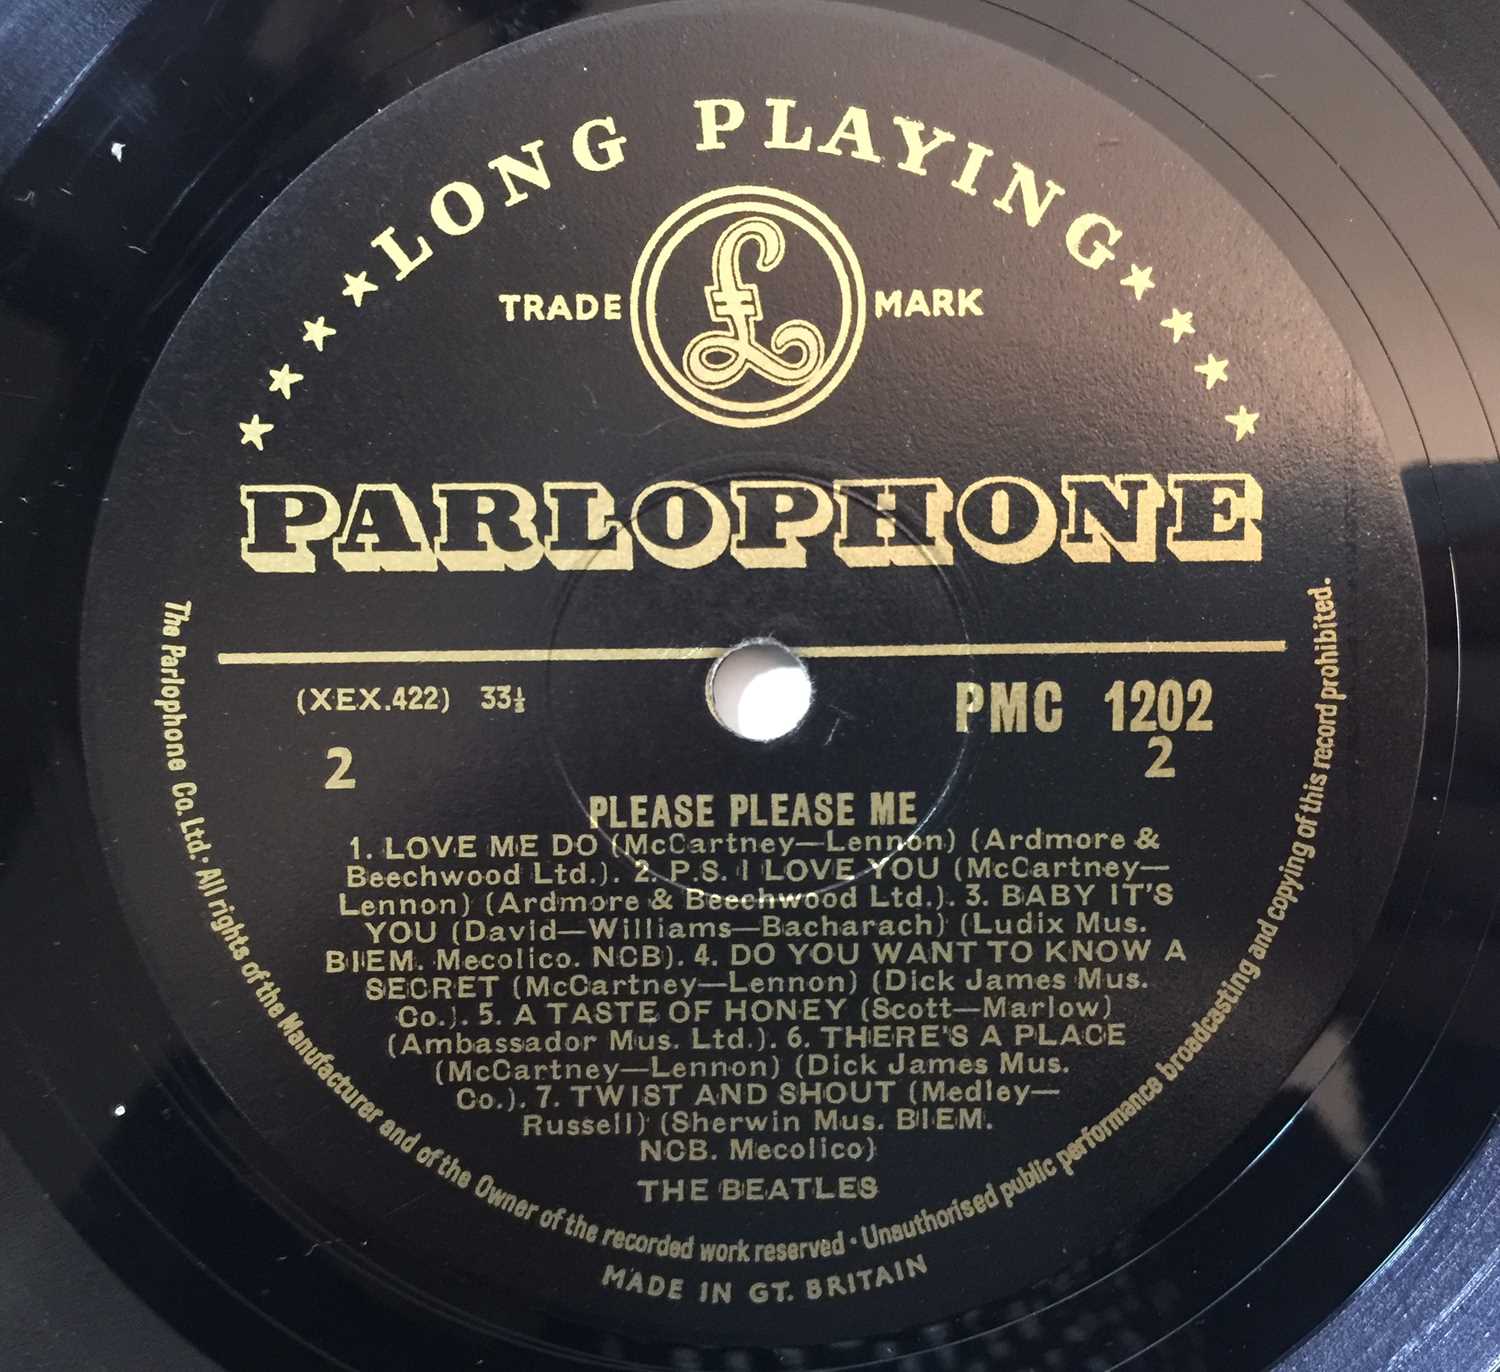 THE BEATLES - PLEASE PLEASE ME (MONO 'BLACK AND GOLD' ORIGINAL PMC 1202 - SOLID EXAMPLE) - Image 5 of 5